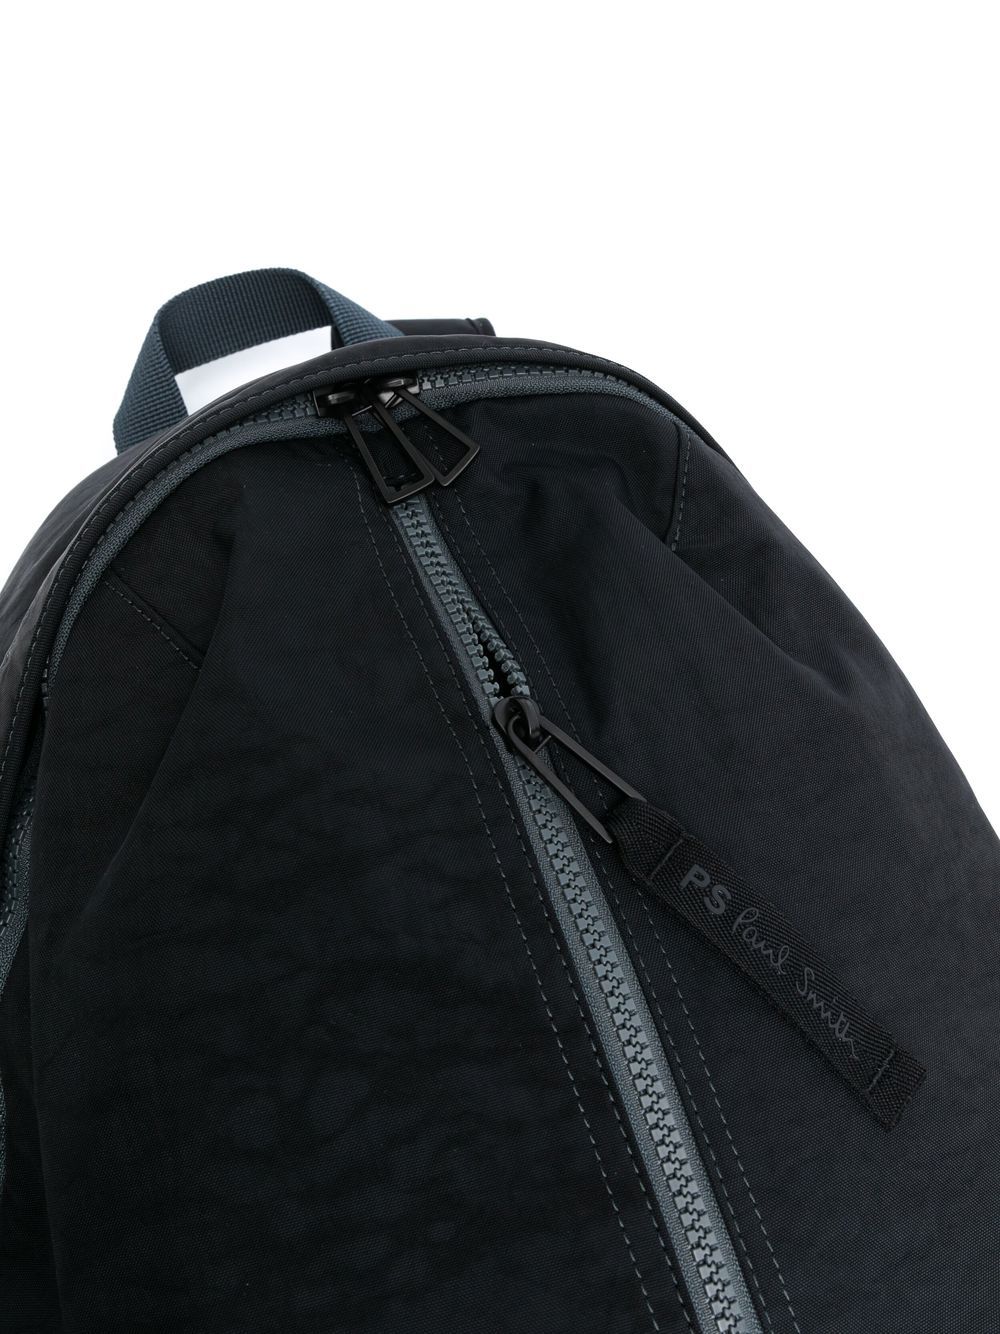 PS by Paul Smith Black Nylon Backpack PS by Paul Smith